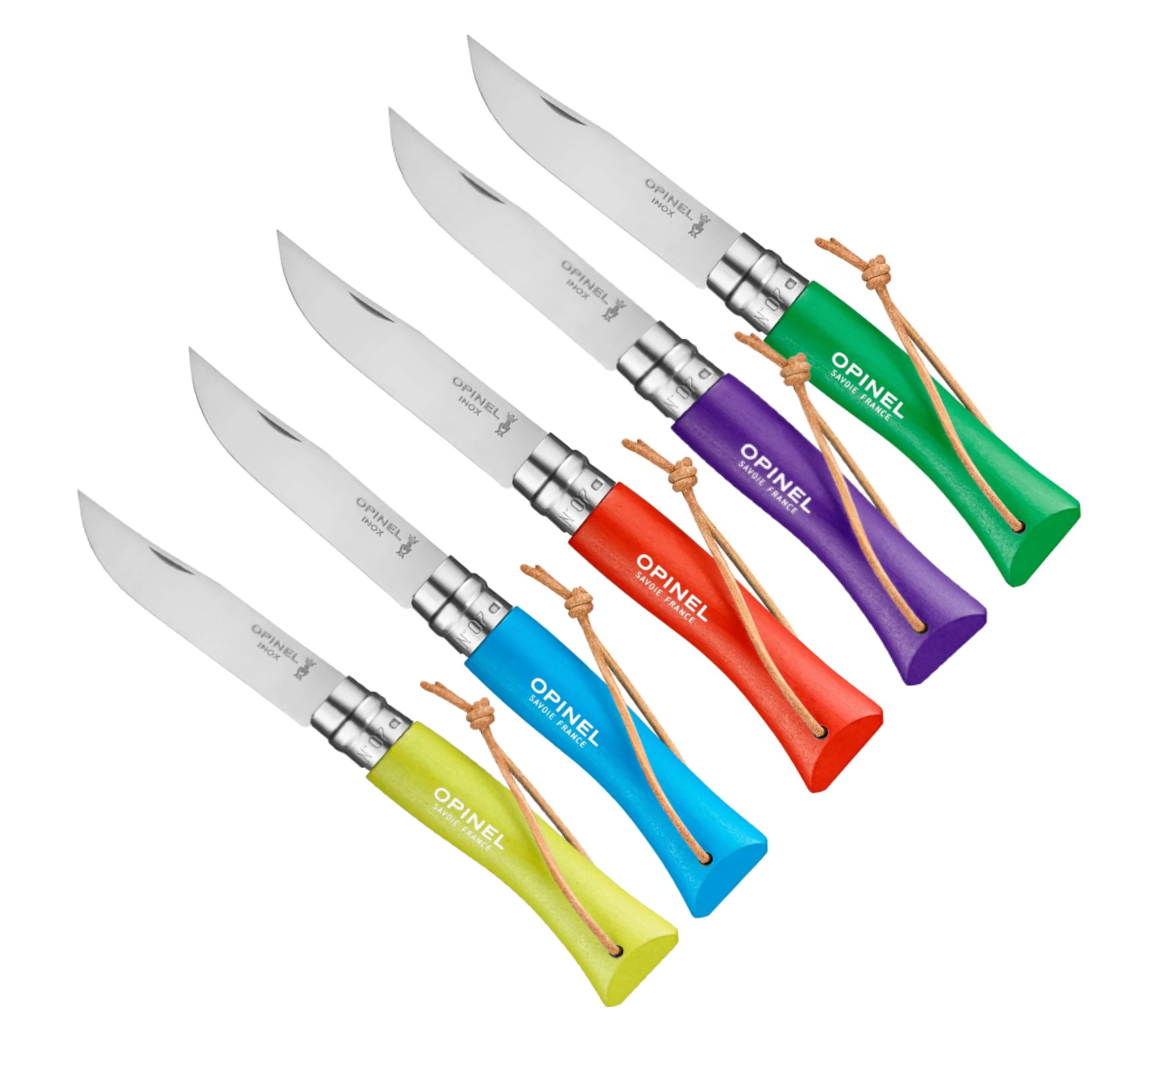 No.07 Colorama Stainless Folding Knives